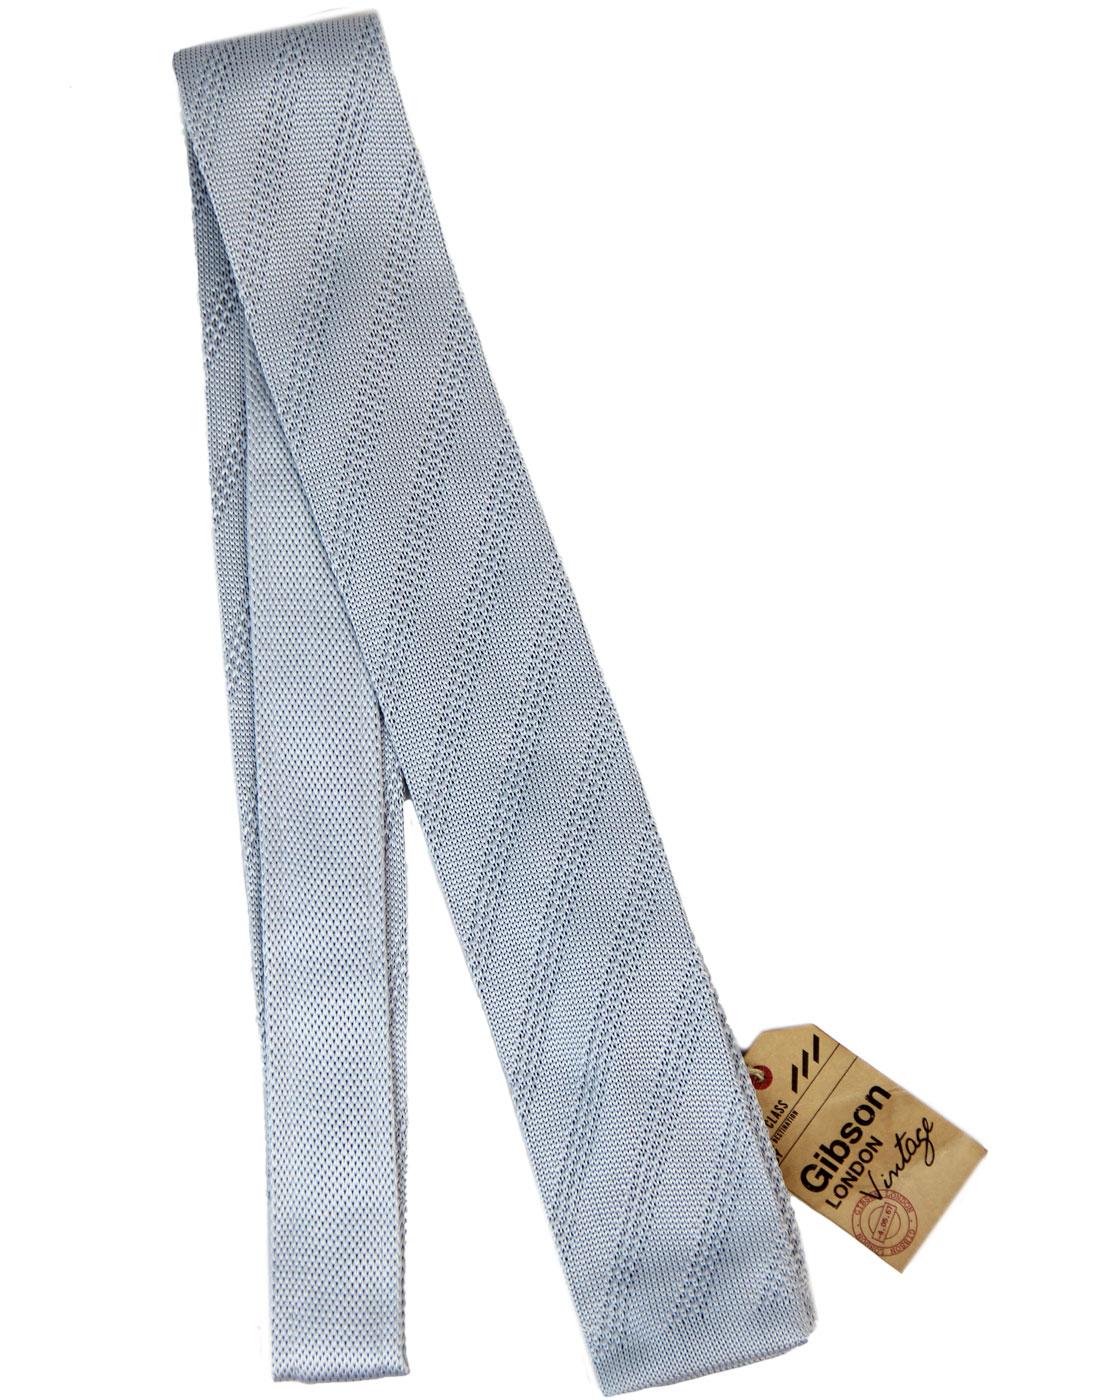 GIBSON LONDON Retro 60s Mod Square End Knitted Stripe Tie Silver